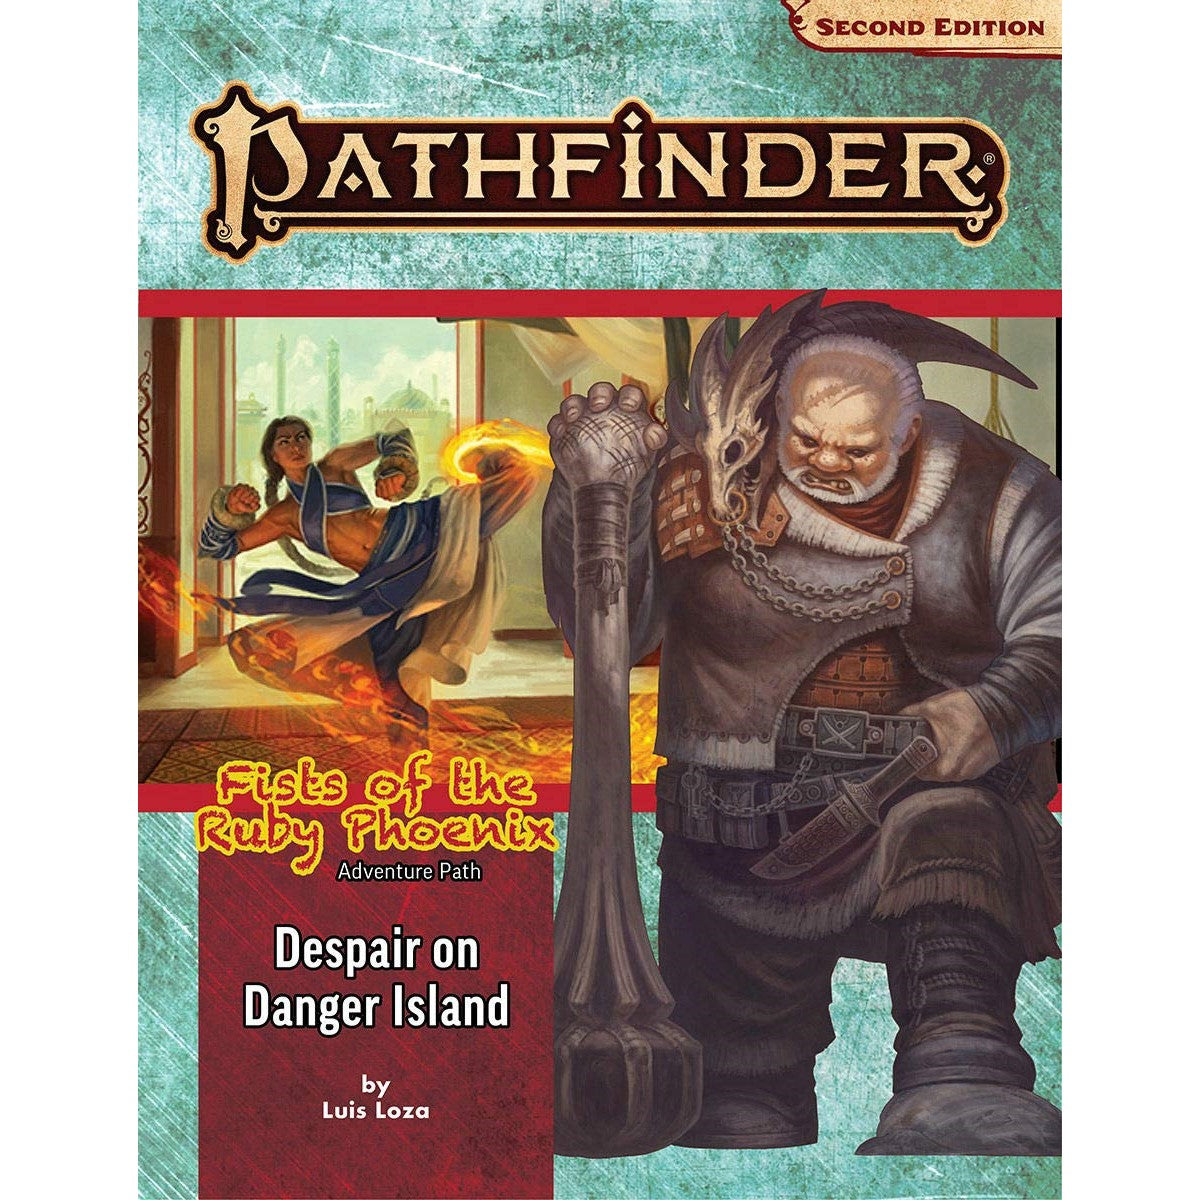 Pathfinder Second Edition Adventure Path Fists of the Ruby Phoenix #1 Despair on Danger Island